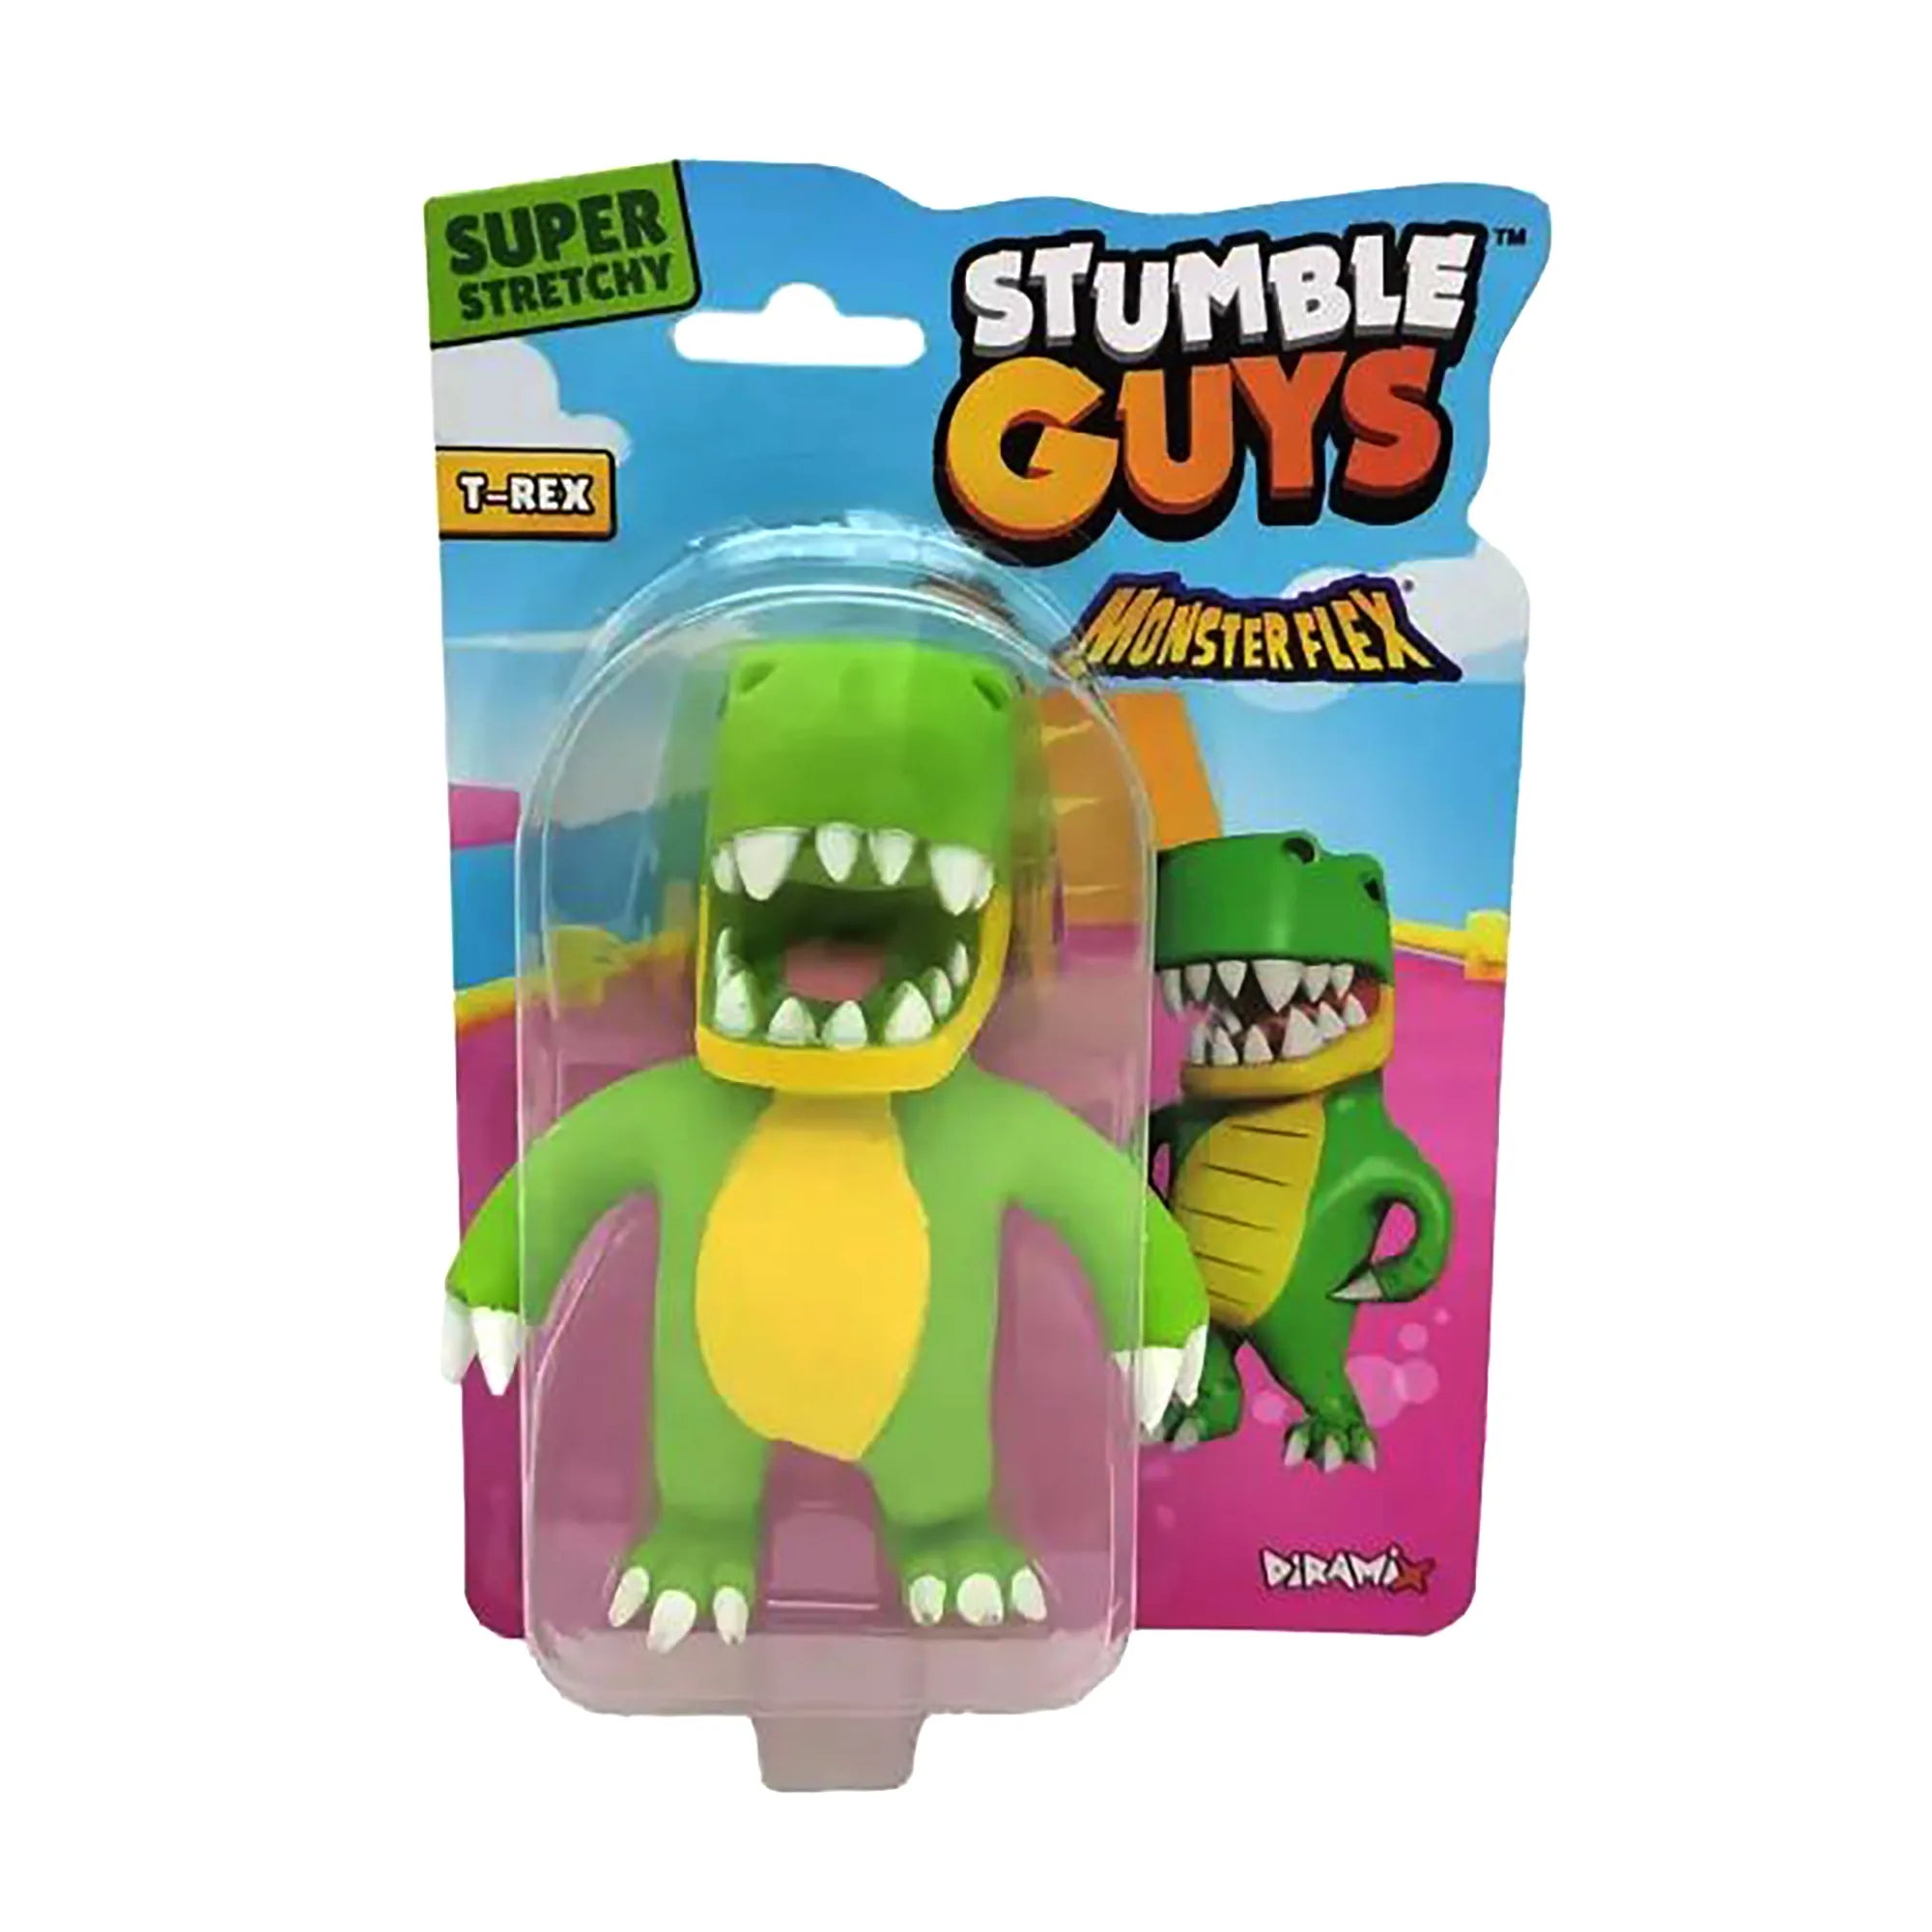 Stumble Guys Monster Flex - T-Rex - Collectible - Ages 6-Adult - Brown's Hobby & Game